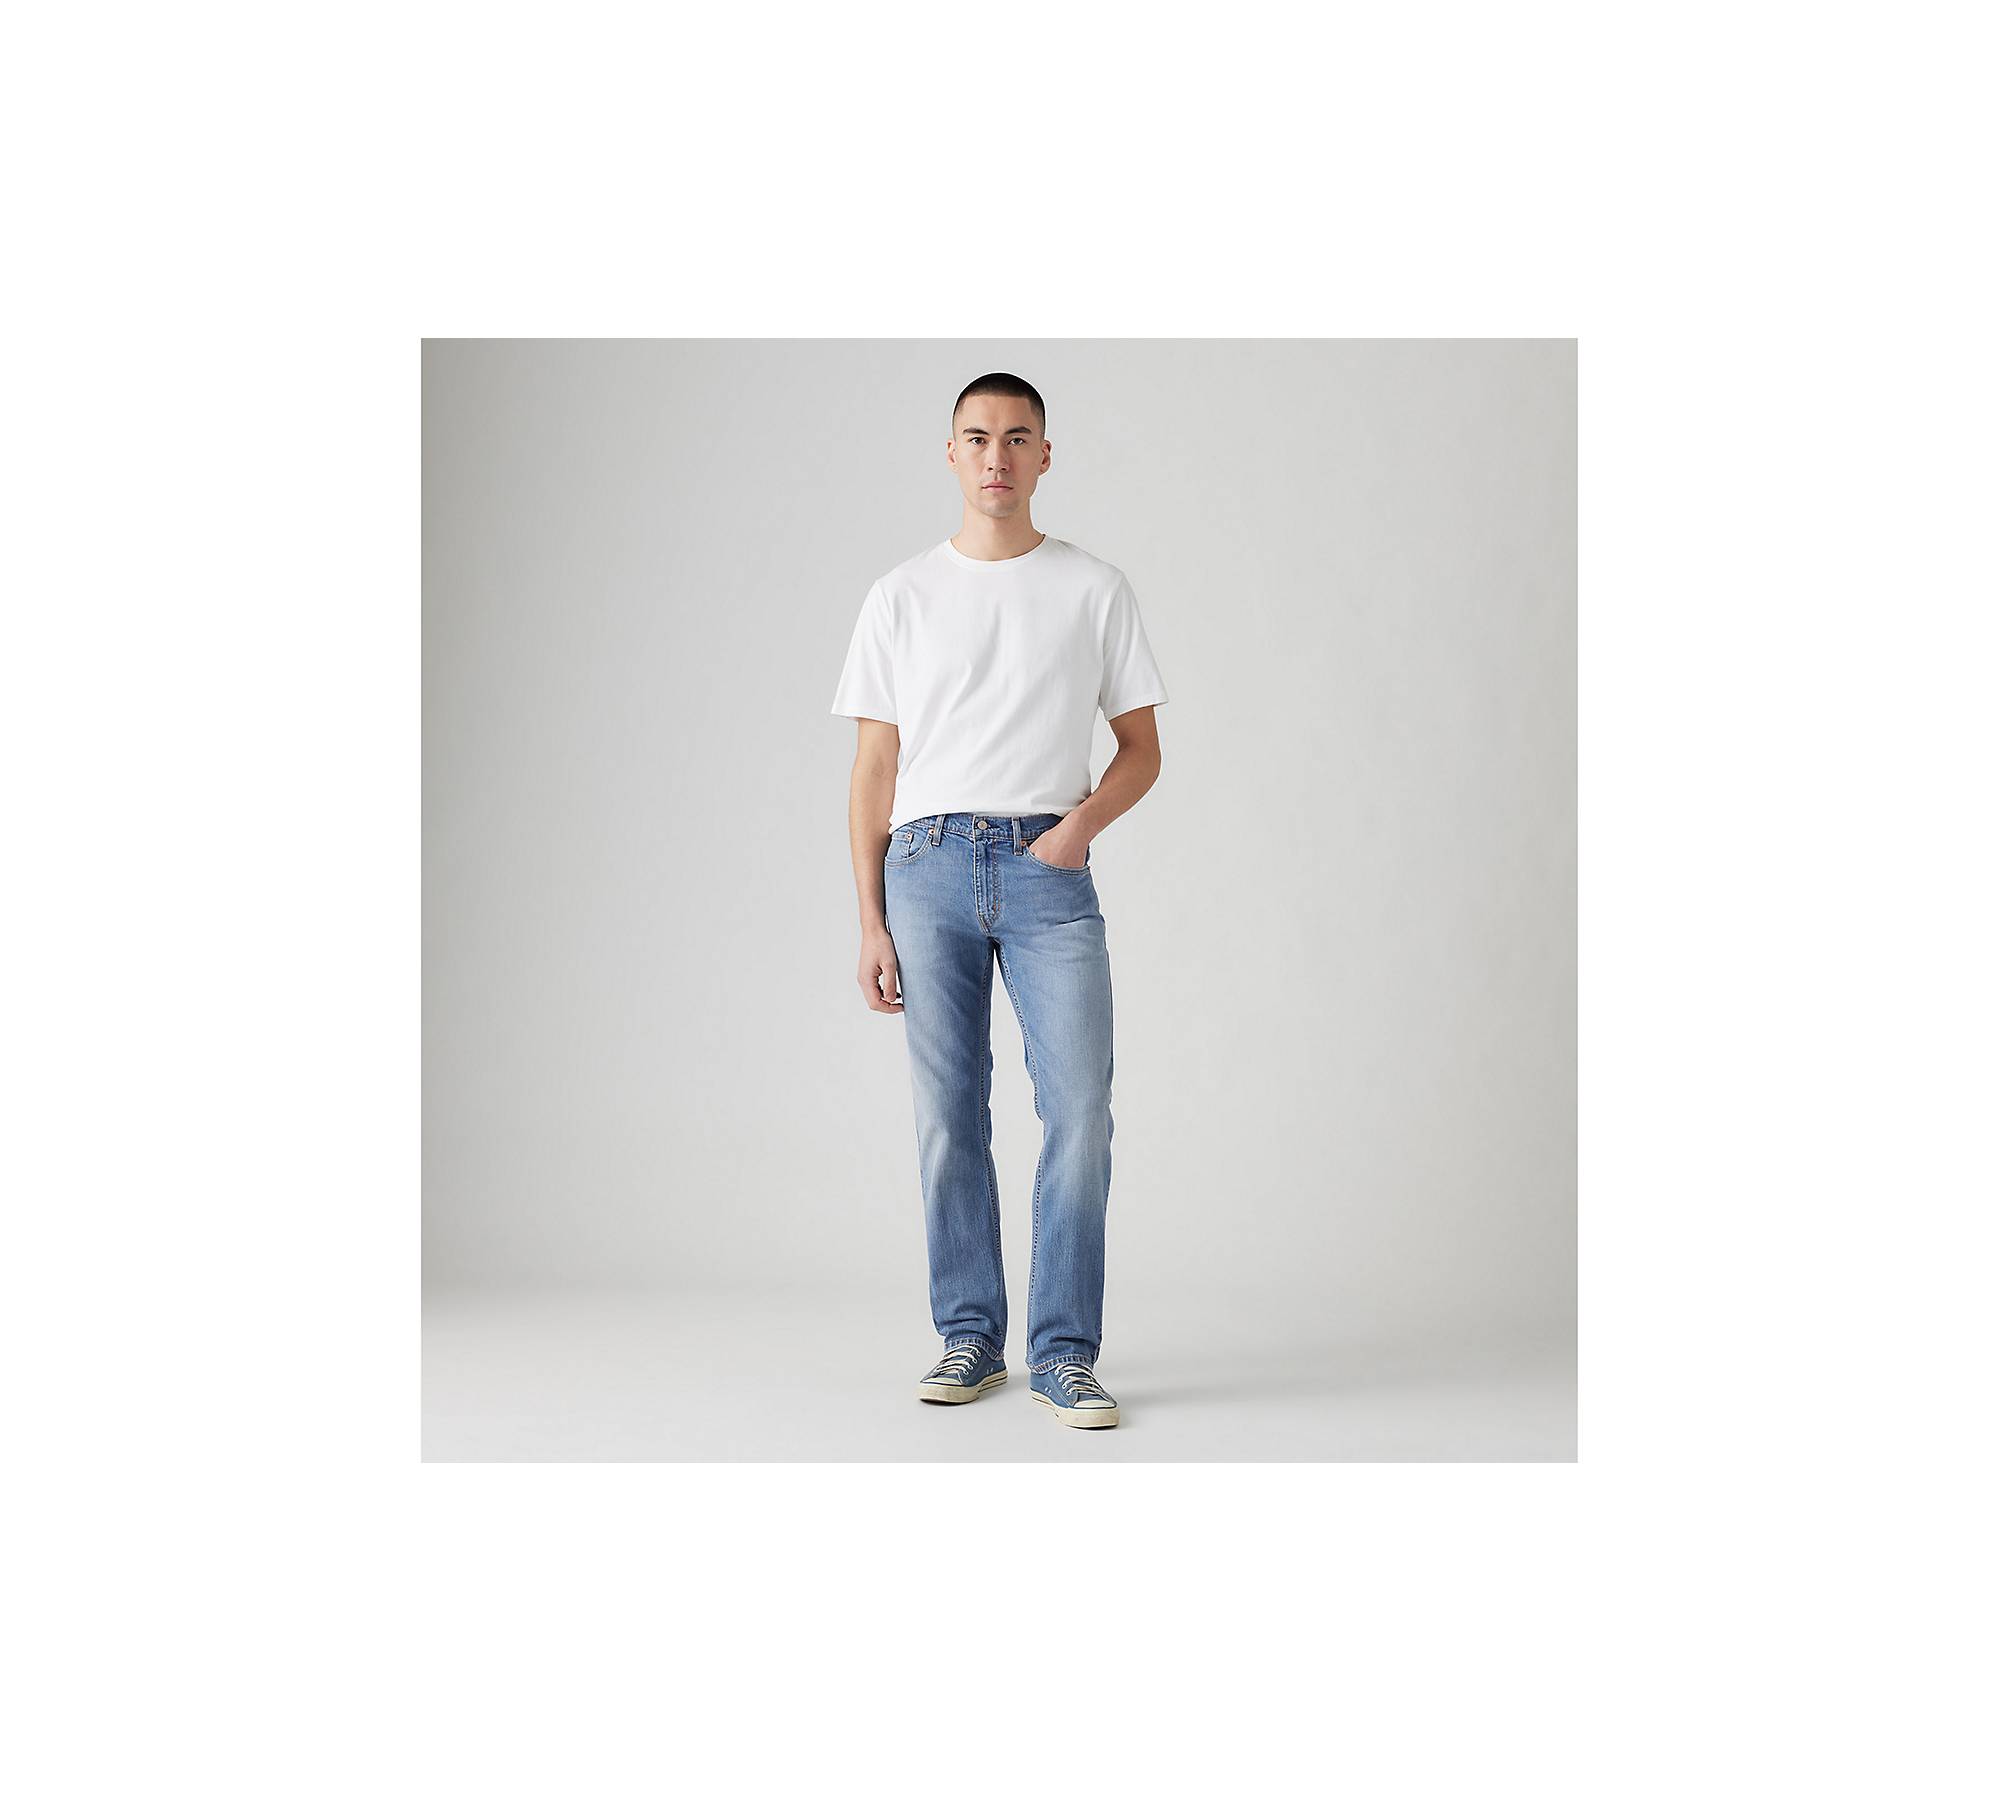 559™ Relaxed Straight Fit Men's Jeans - Medium Wash